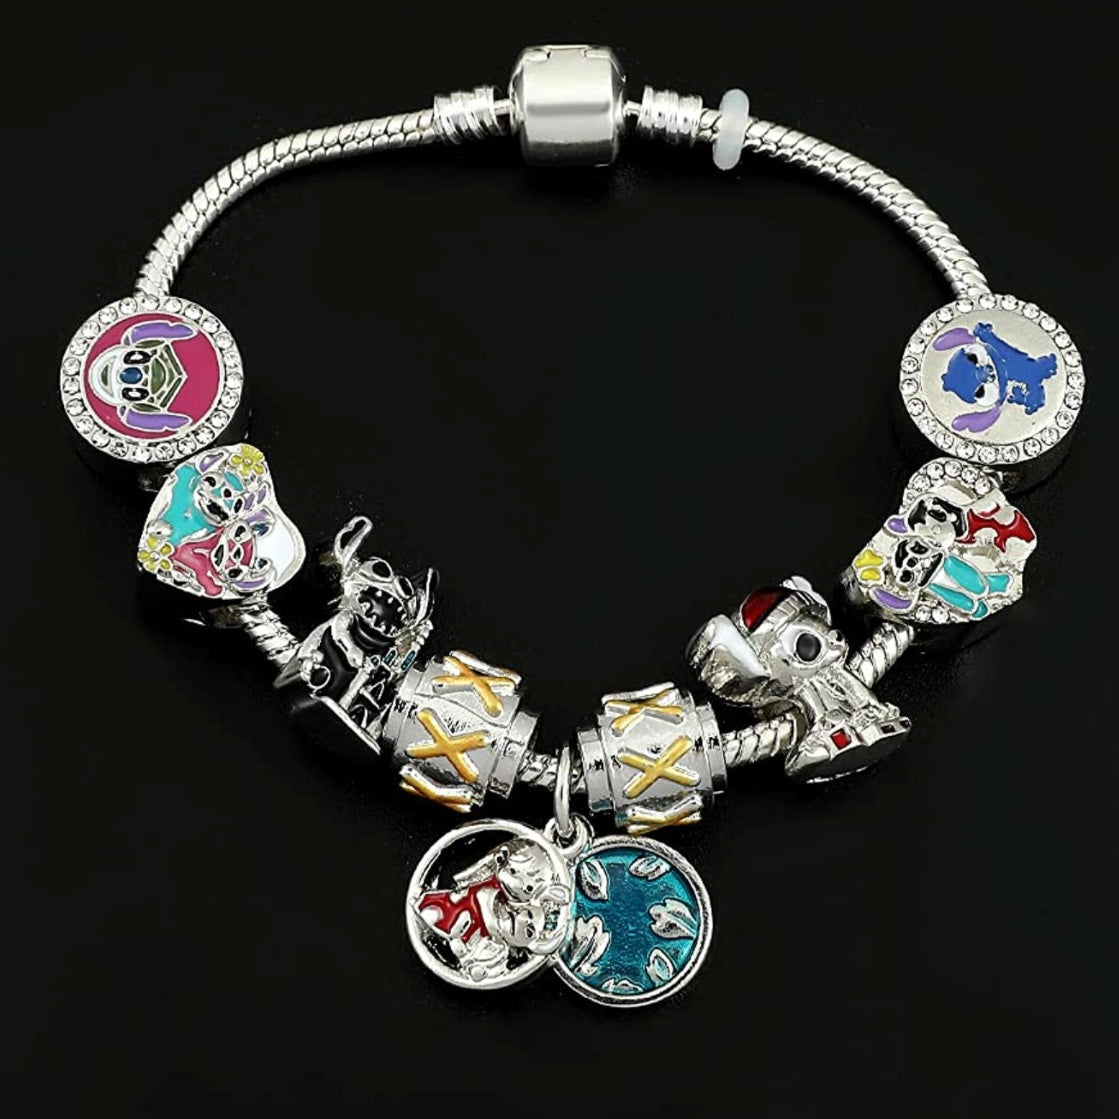  LUV HER Lilo and Stitch 7 Bracelet with Metal Charms